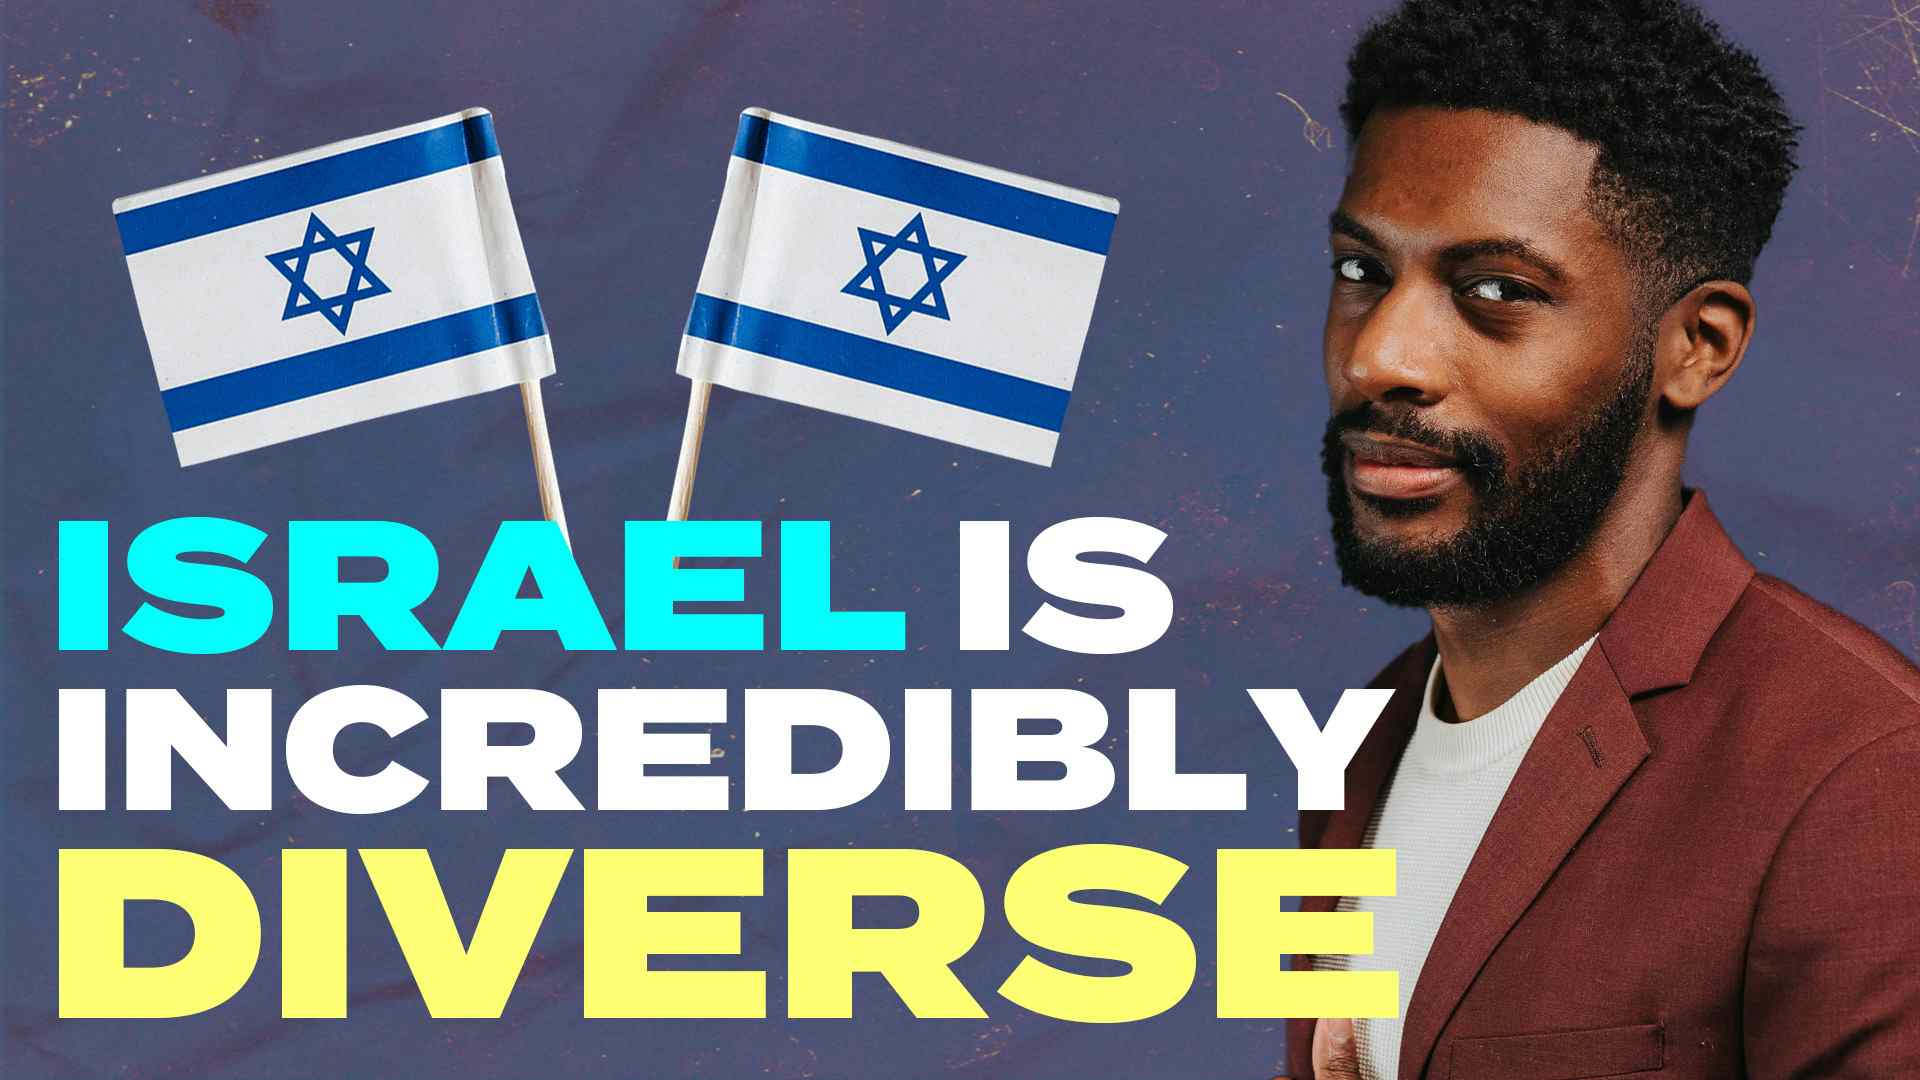 Israel Is Incredibly Diverse